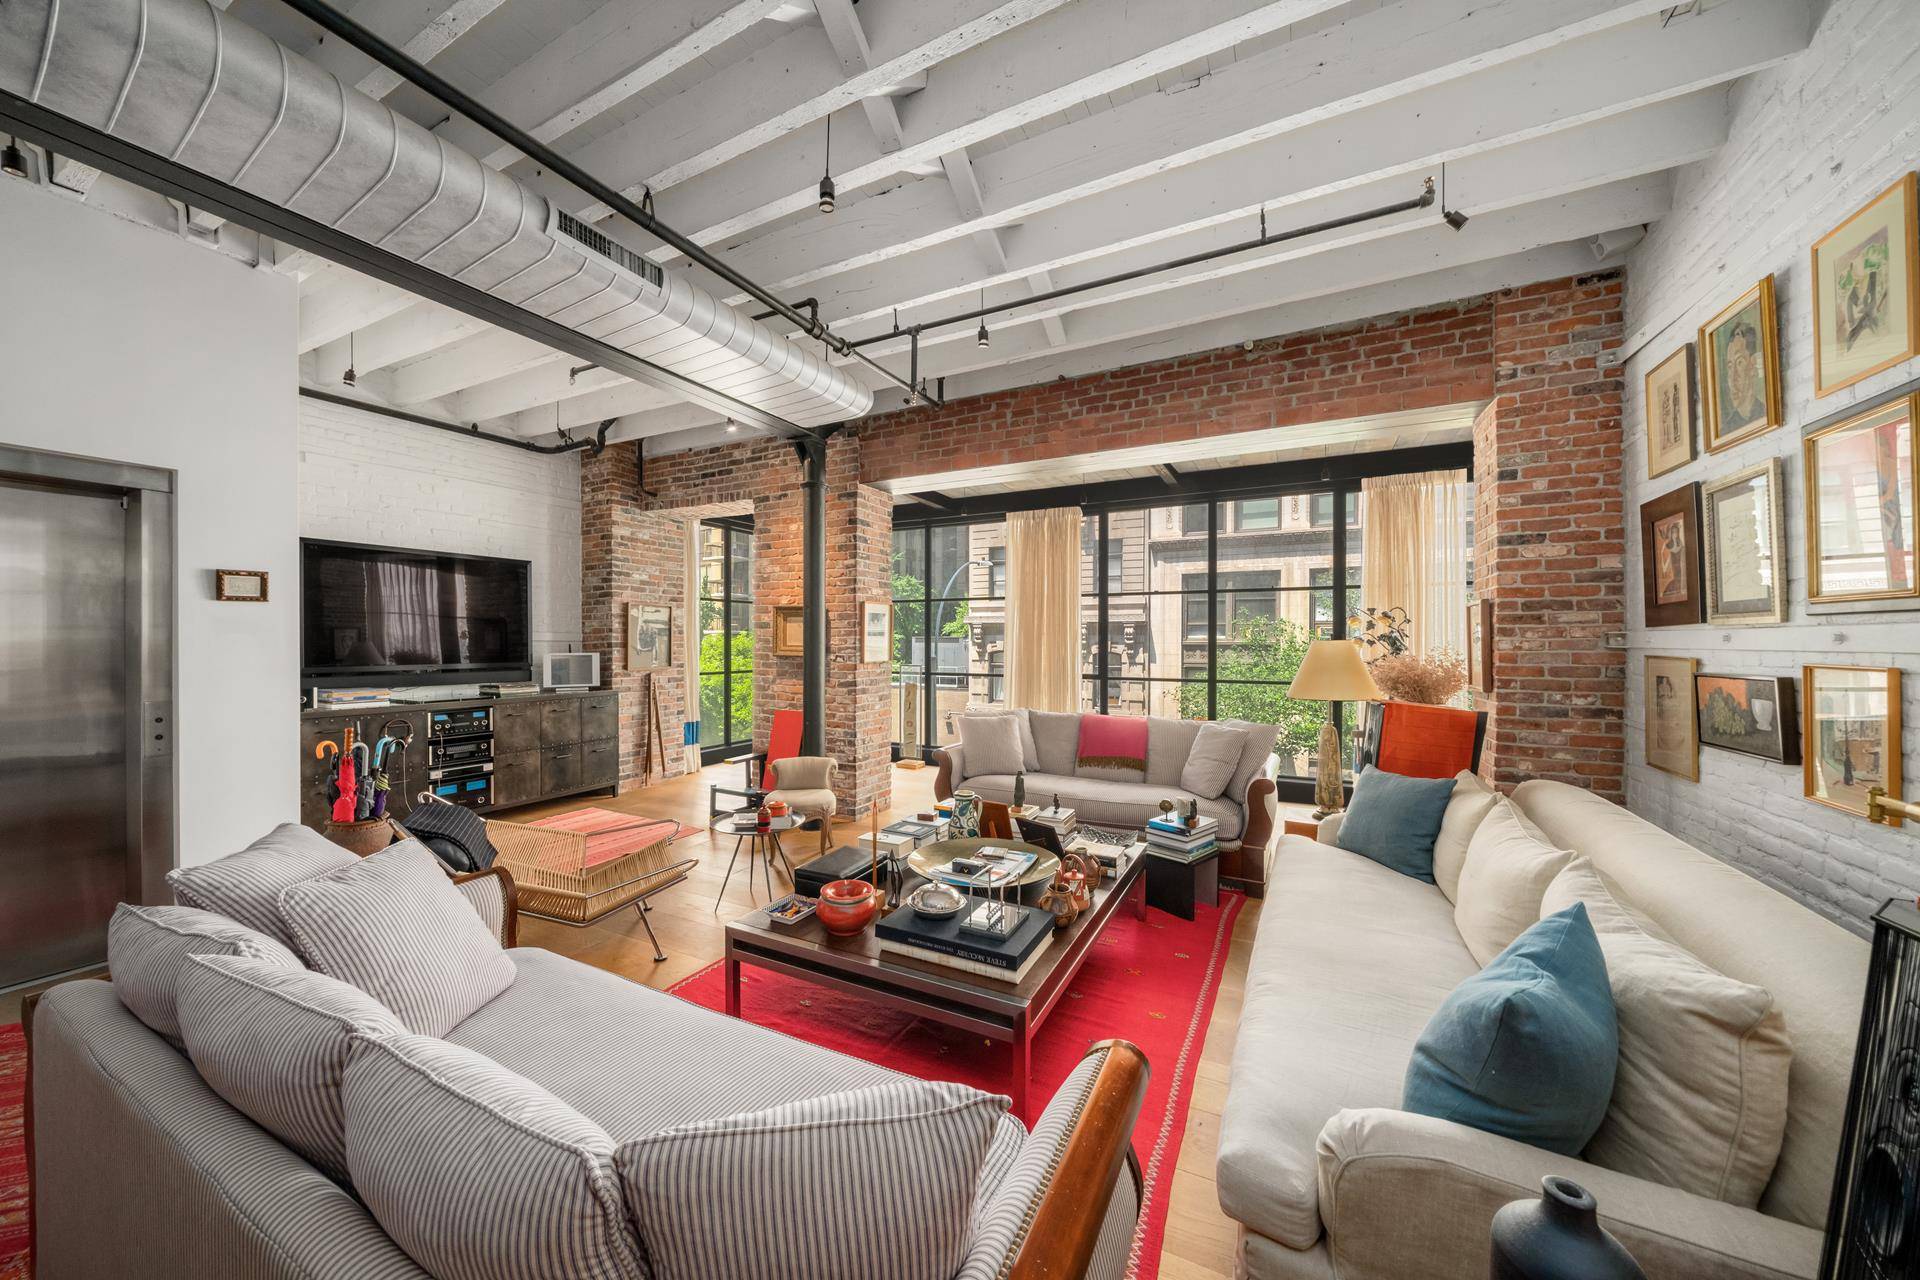 This 4, 000 SF duplex loft is a stunning 3 bed, 2.